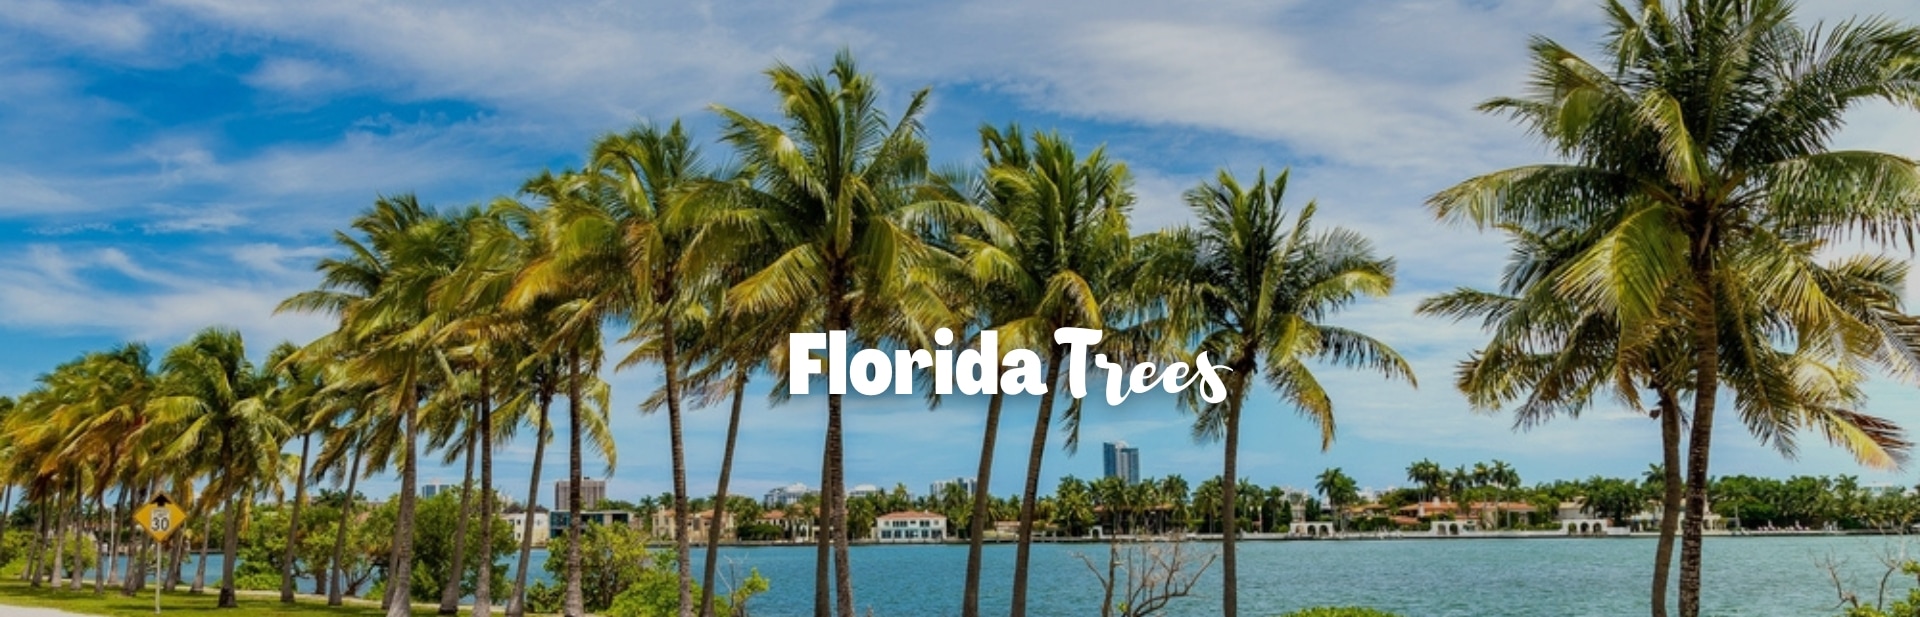 33 Types of Florida Trees to Look for in the Sunshine State